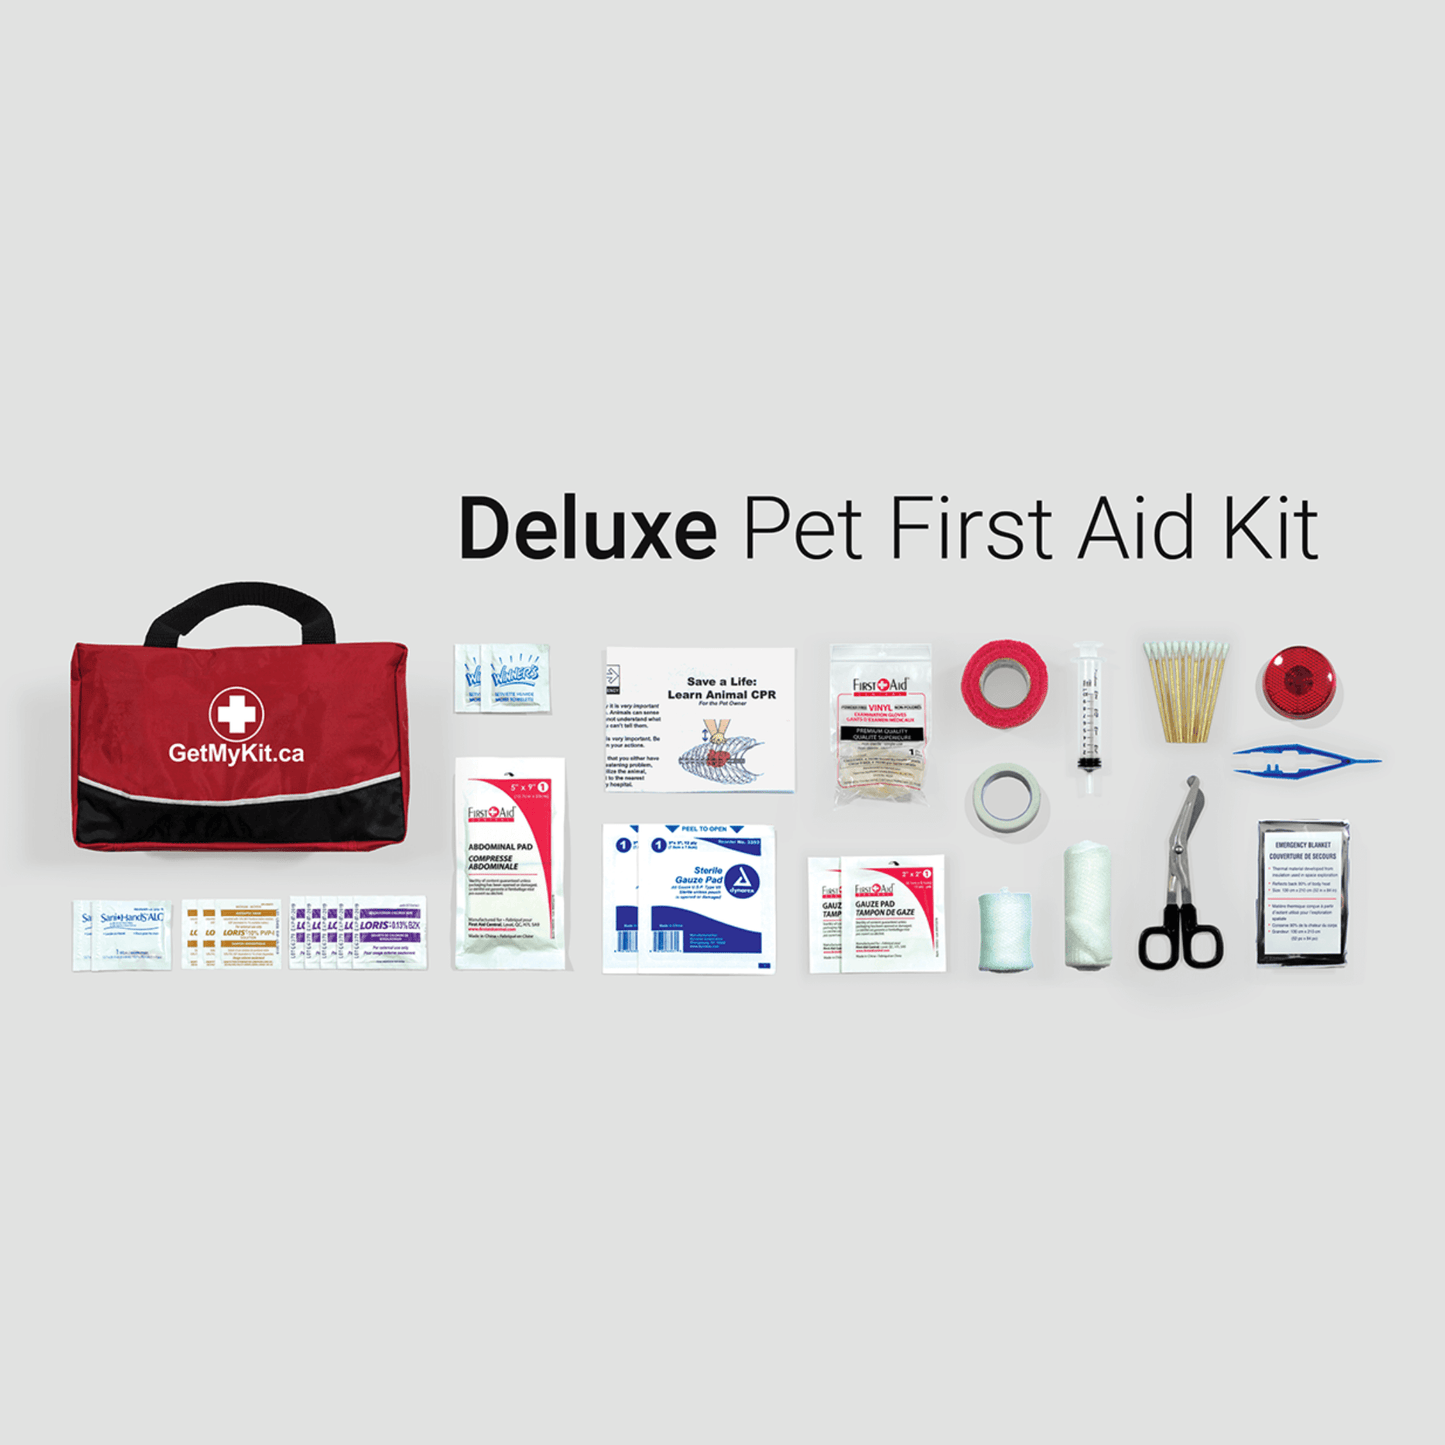 Bag of deluxe pet first aid supplies.